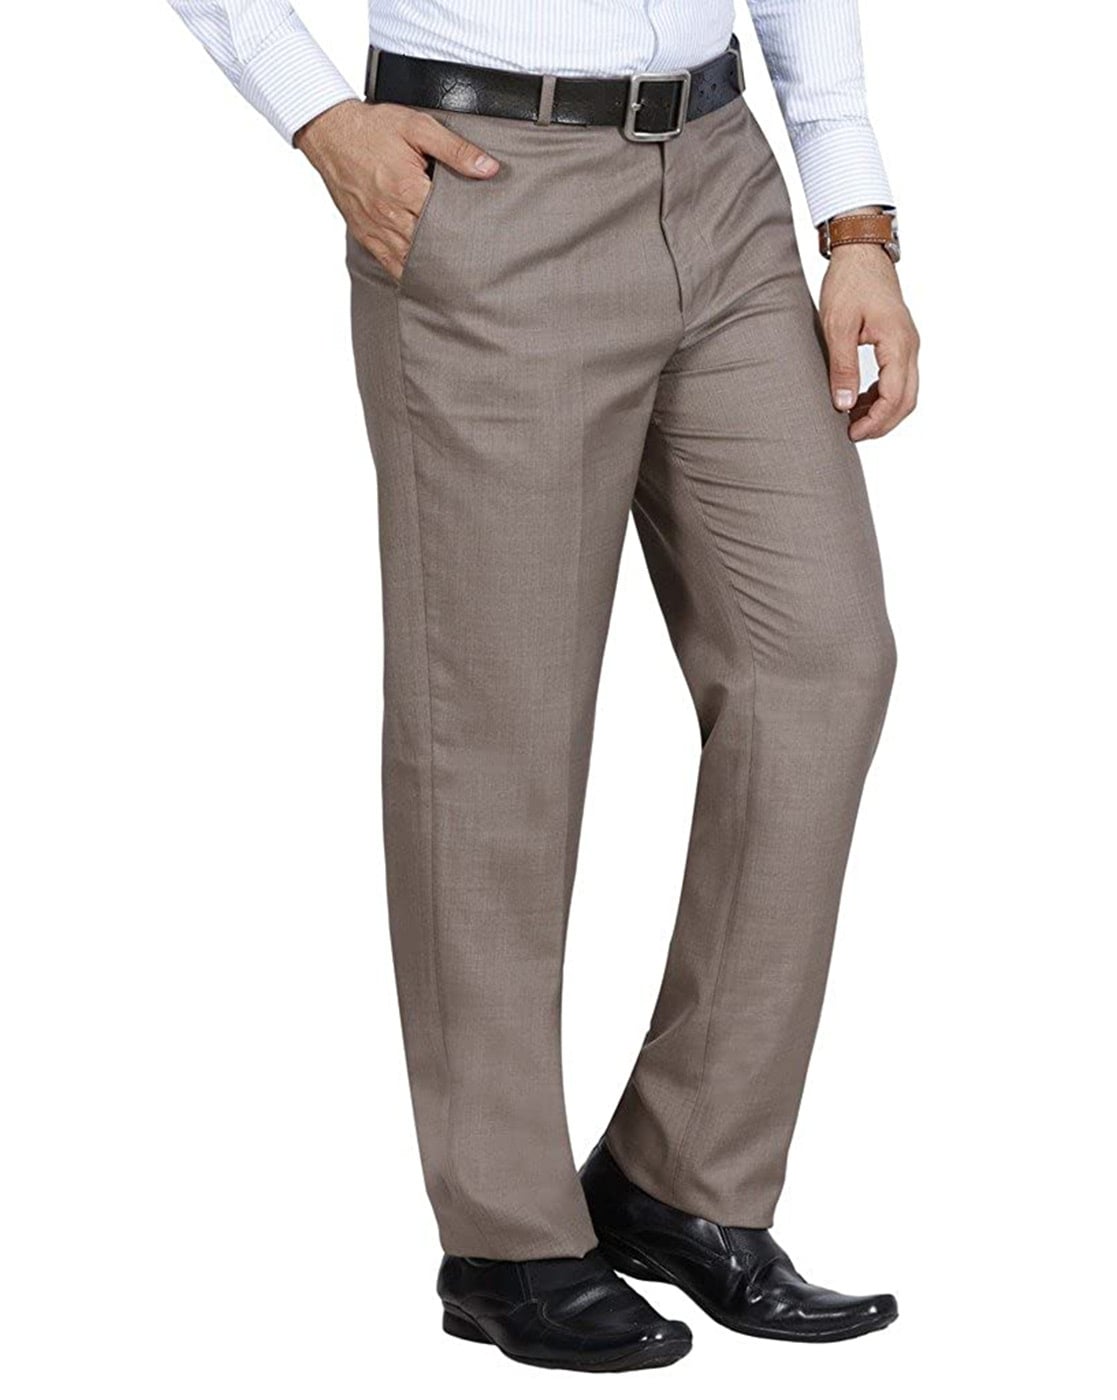 Buy Beige Trousers & Pants for Men by MCHENRY Online